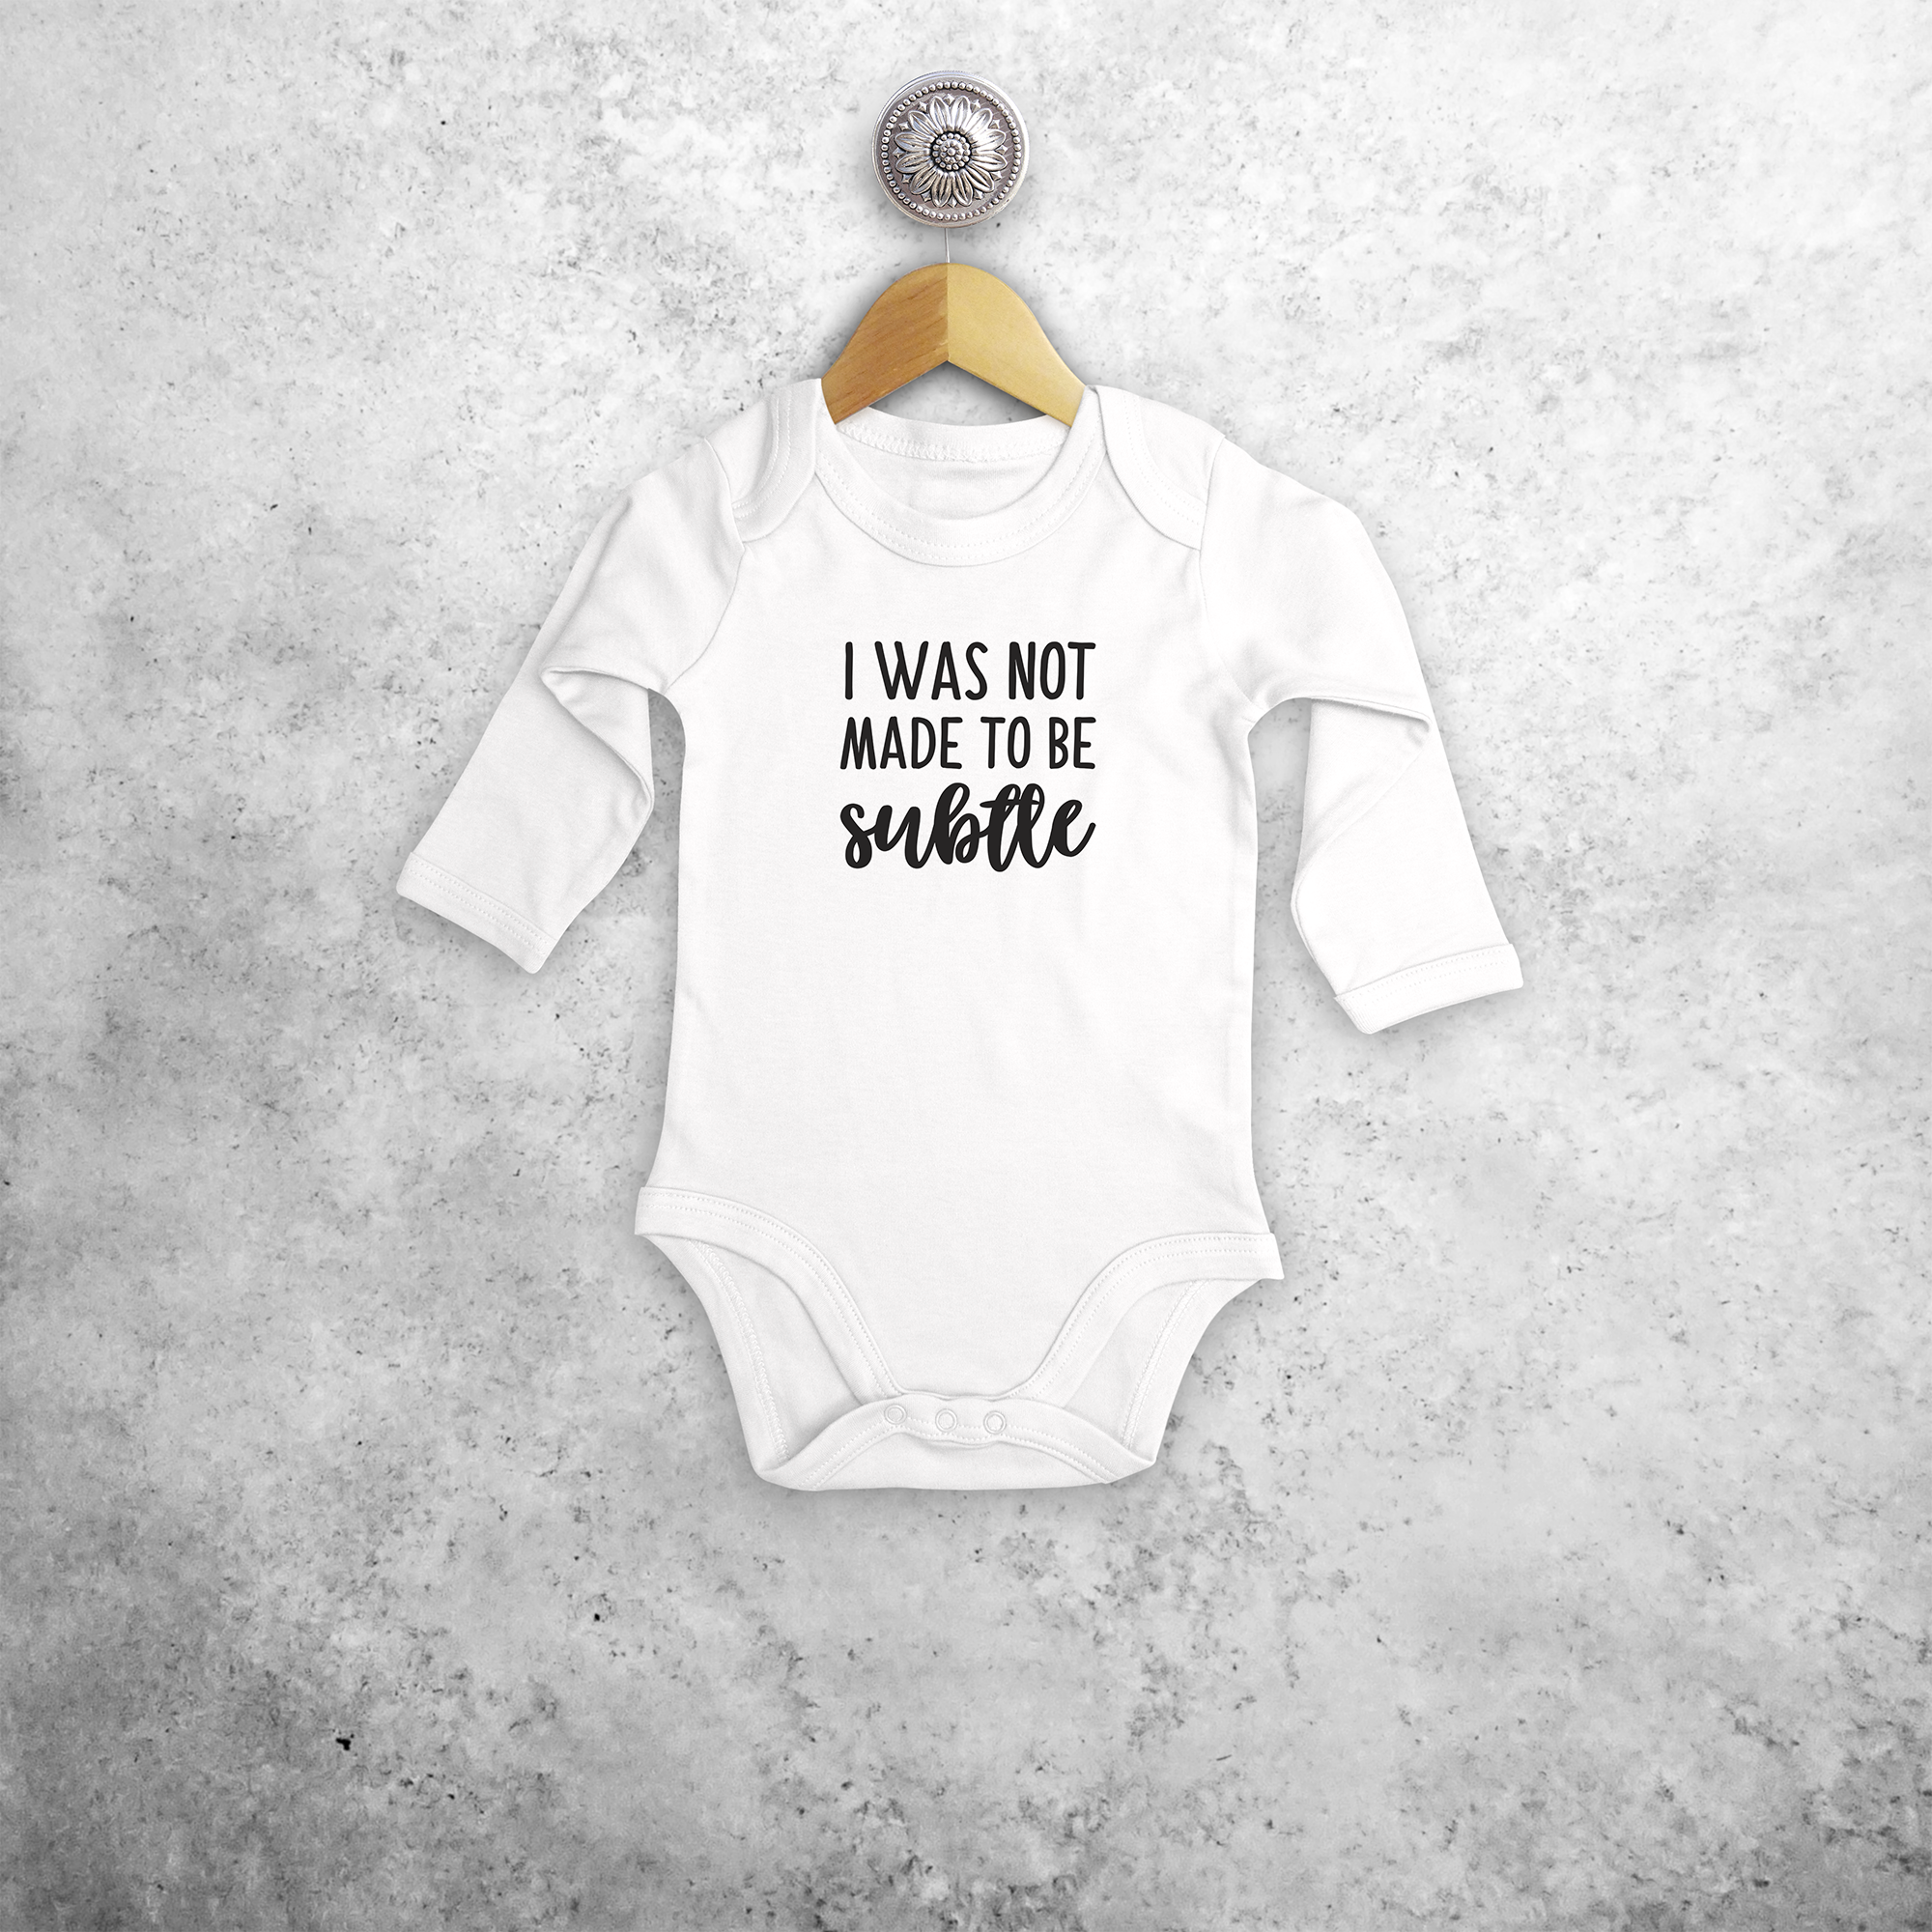 'I was not made to be subtle' baby longsleeve bodysuit